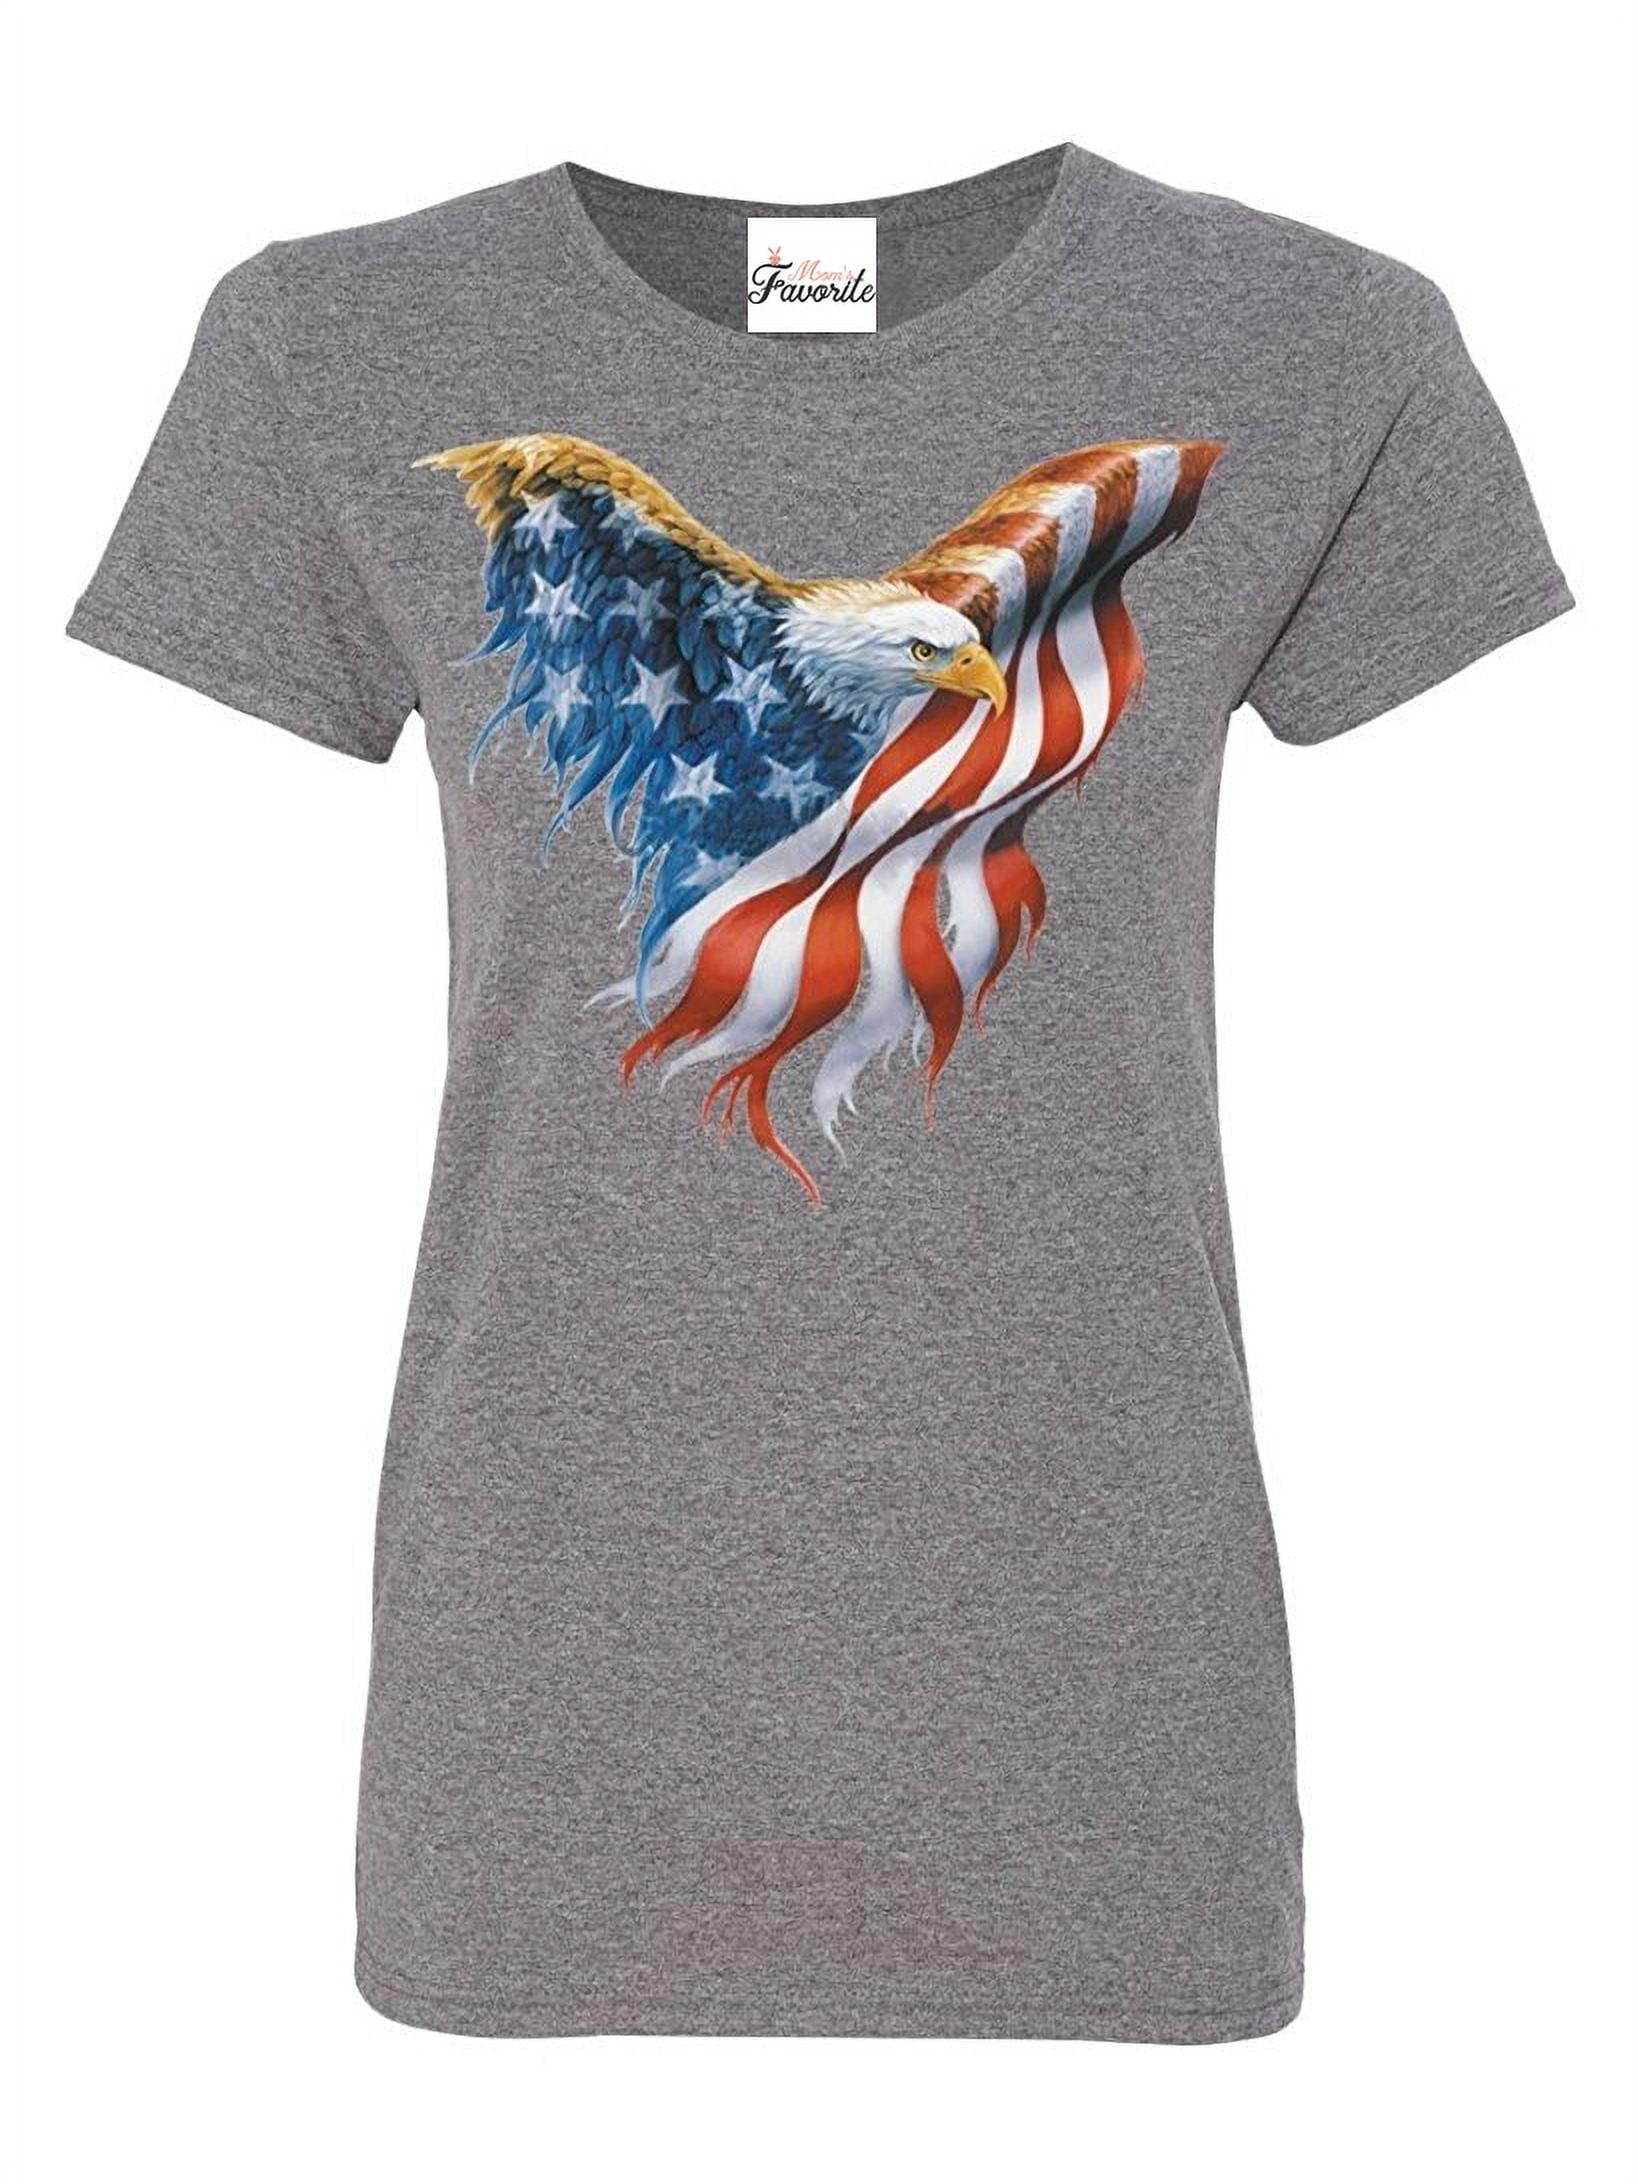 T-Shirt America Eagle Graphic Black Short Sleeve Tee Gift for Men Women Young 